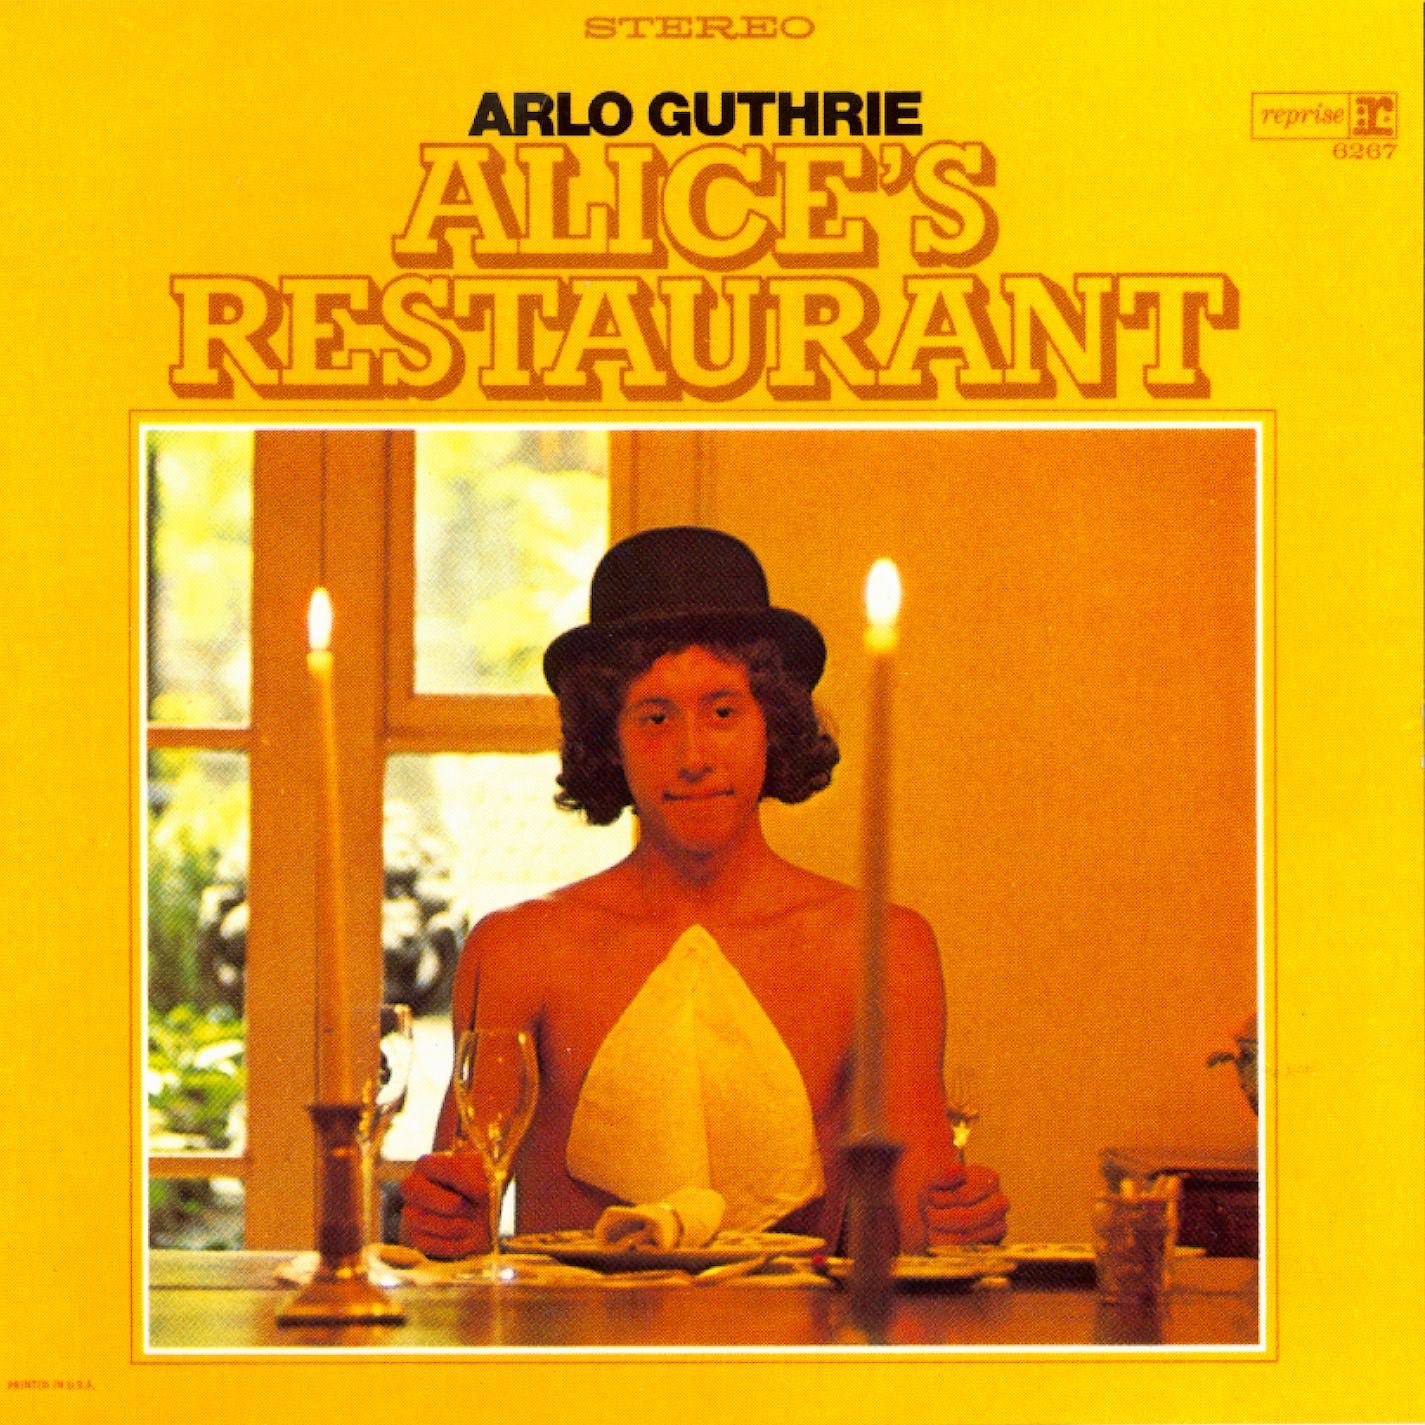 Giving Thanks to Arlo & Alice